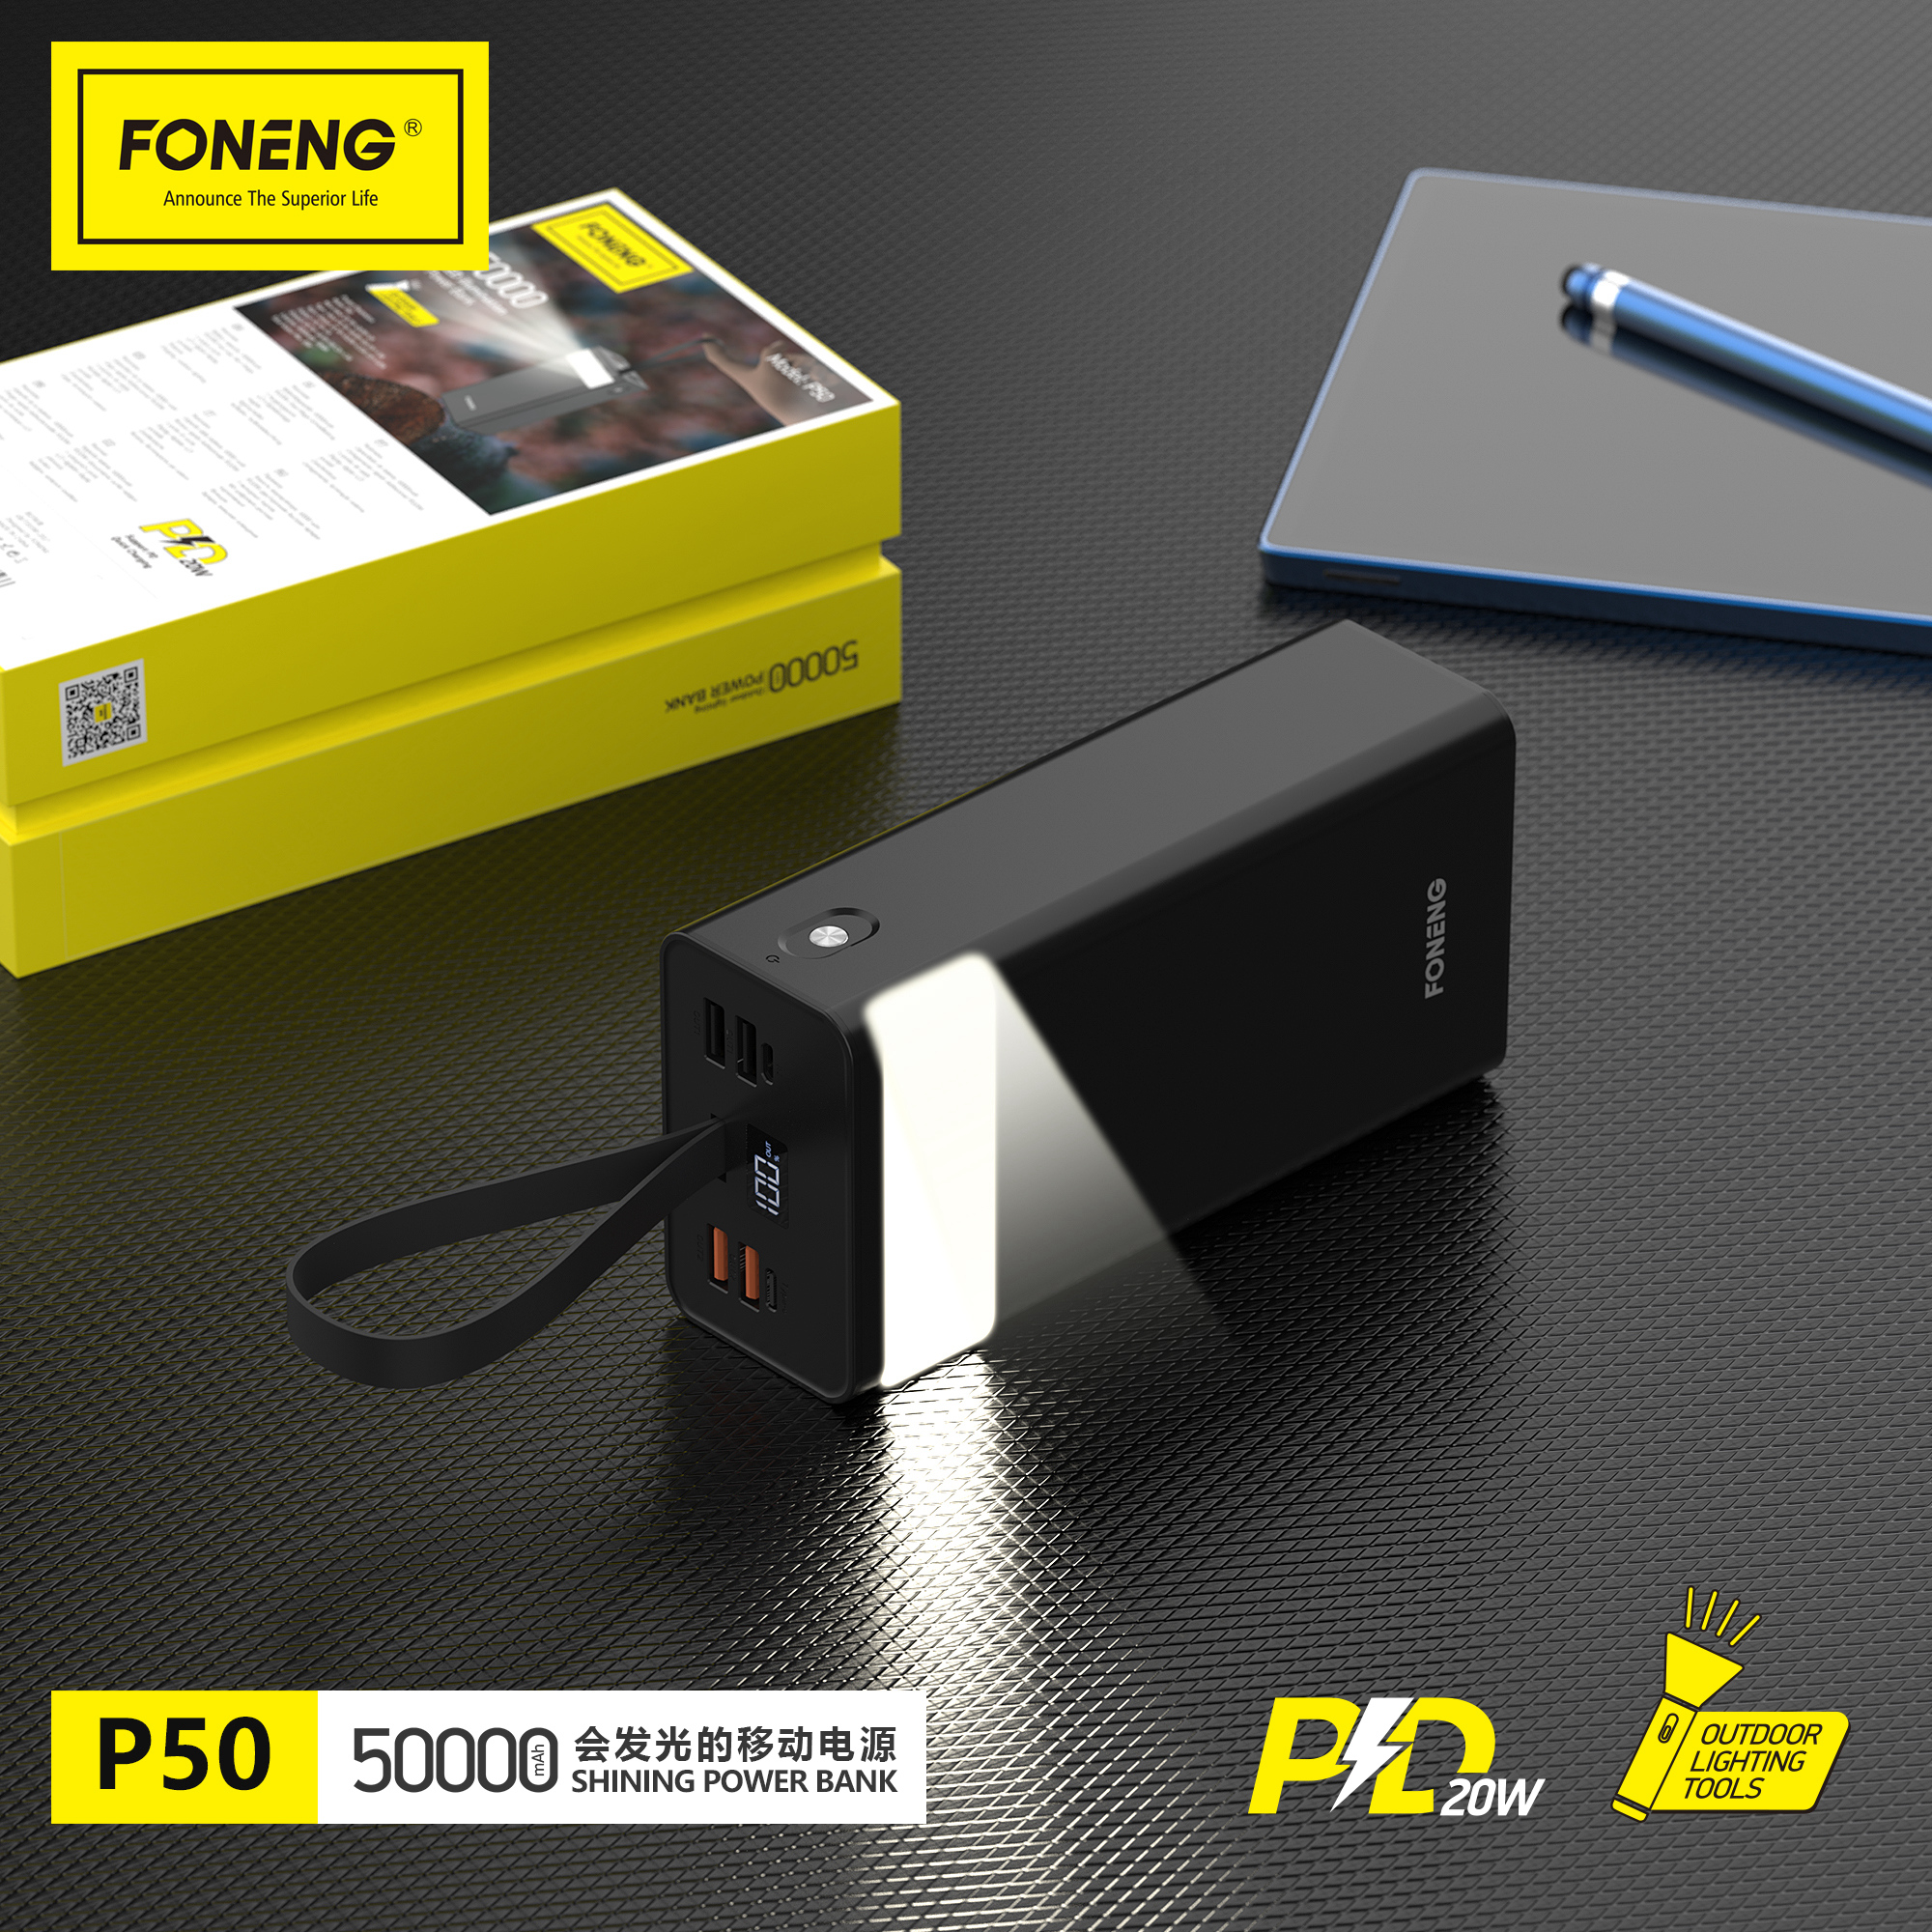 P50 POWER BANK 50000mAh PD 20W Featured Image